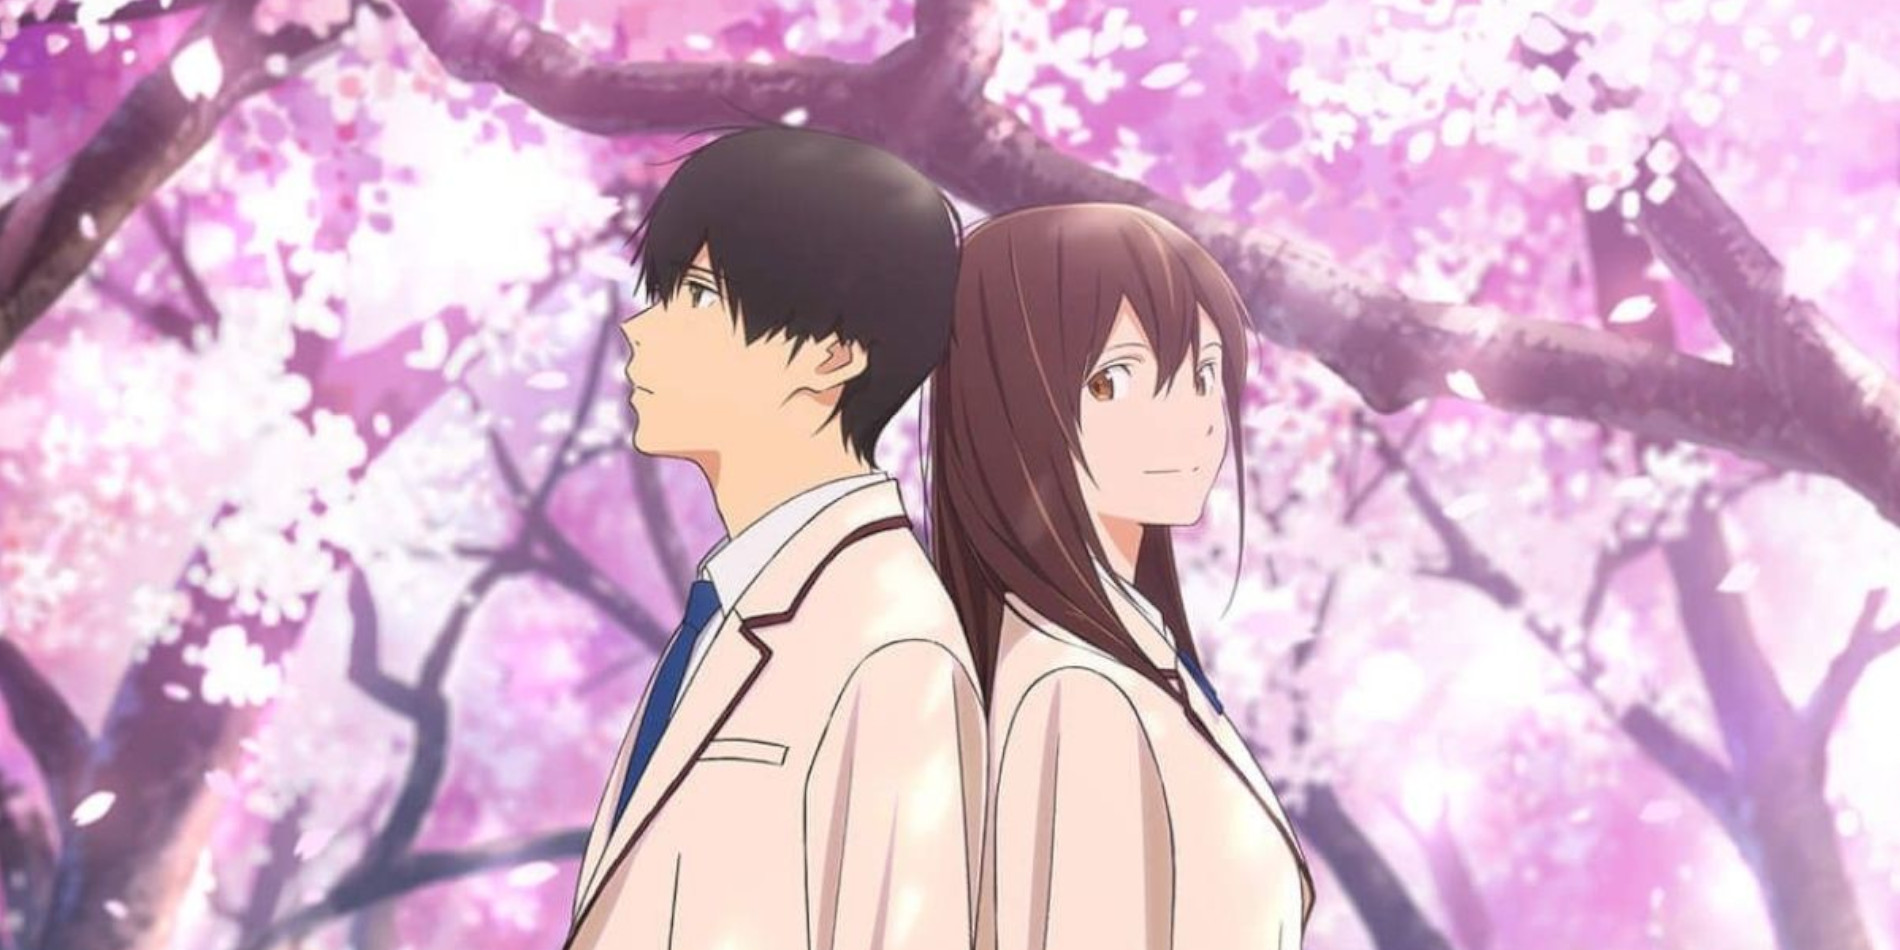 Where to Watch 'I Want to Eat Your Pancreas' - and is it on Netflix?